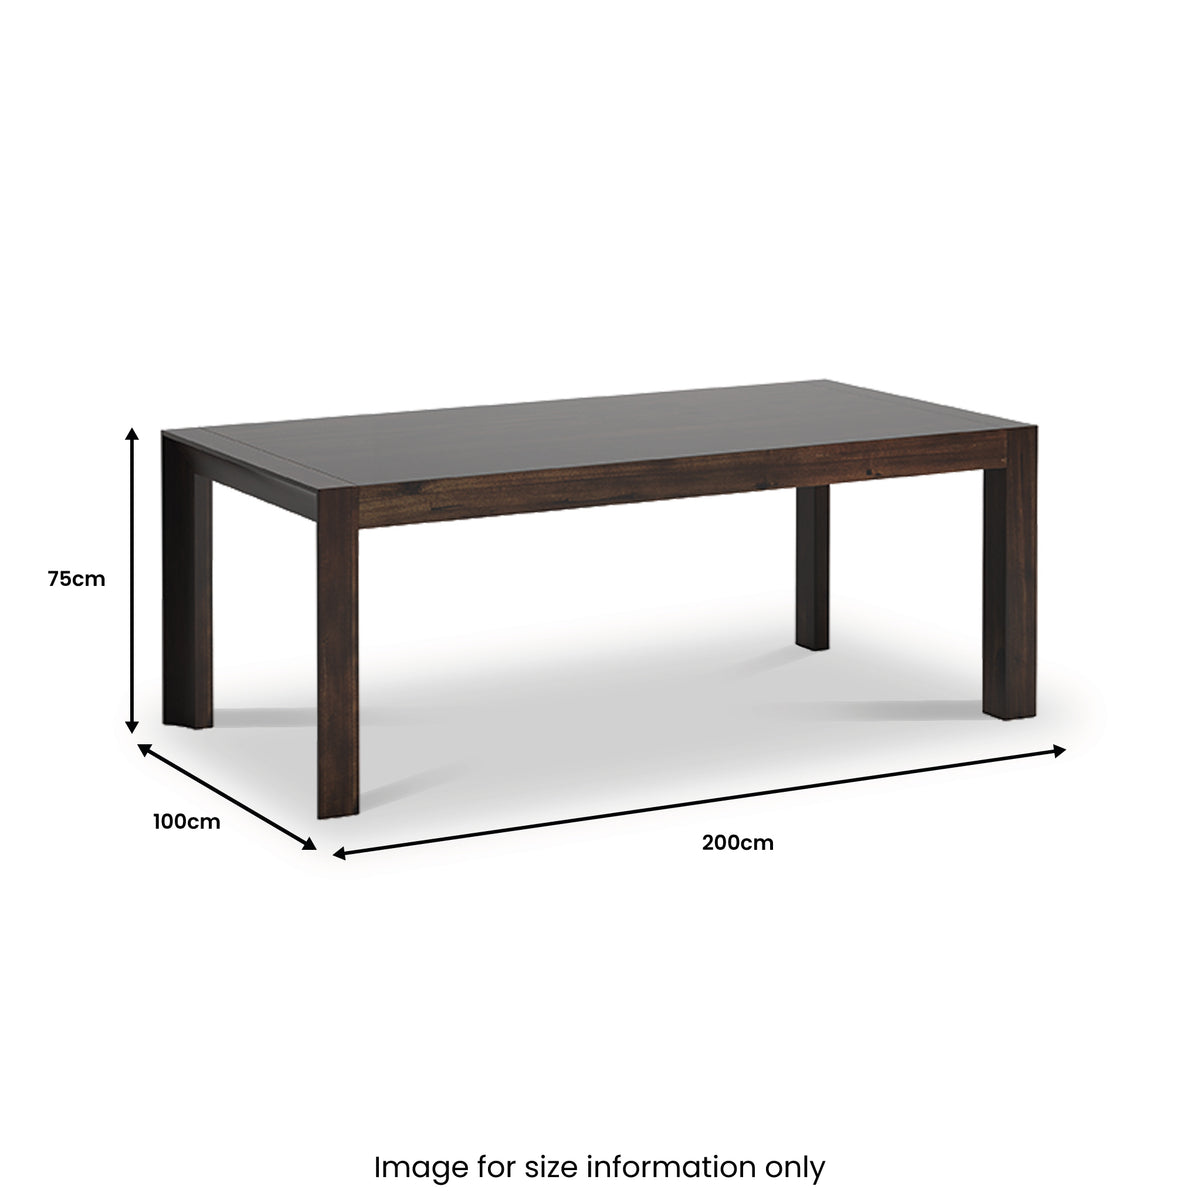 Elton 200cm Dining Table dimensions